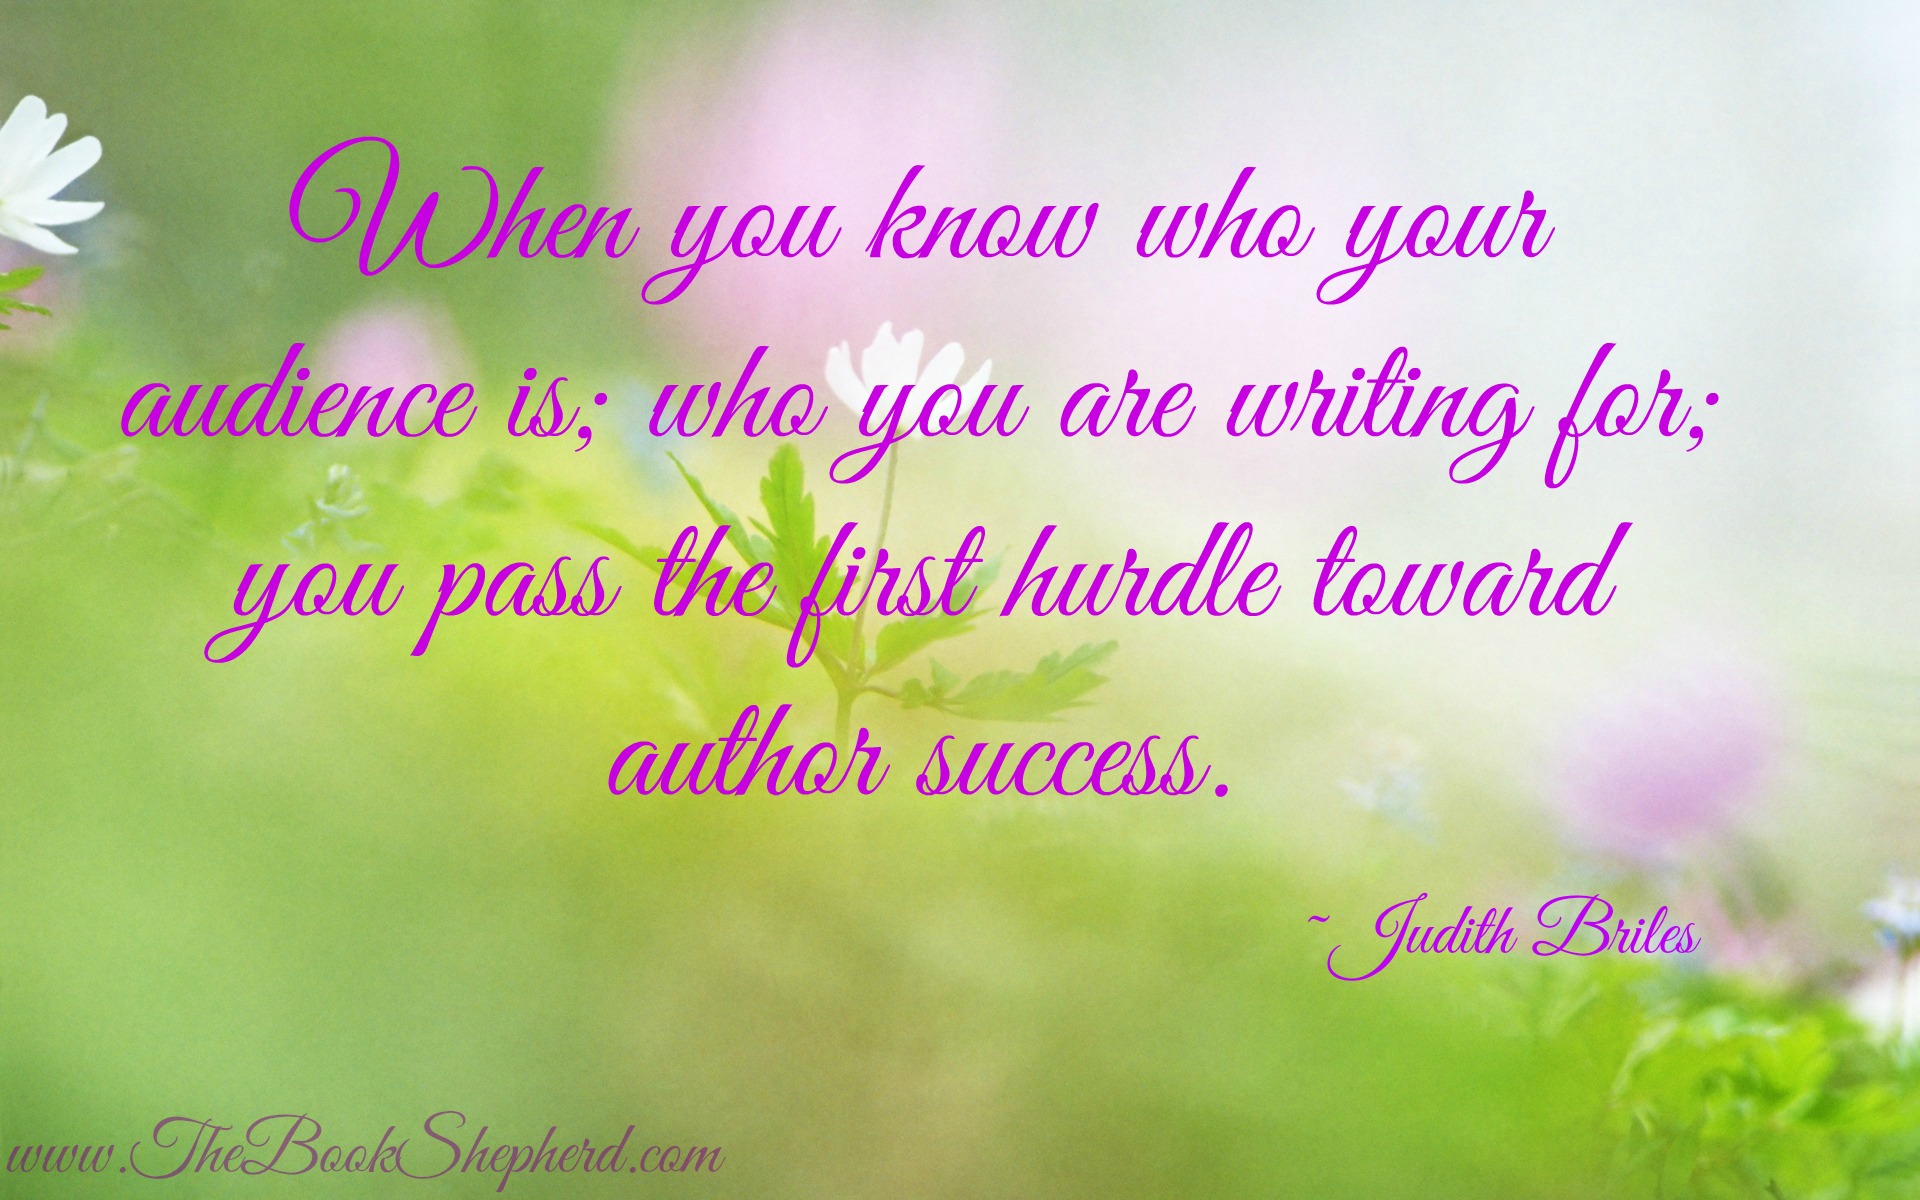 know who u are writing for